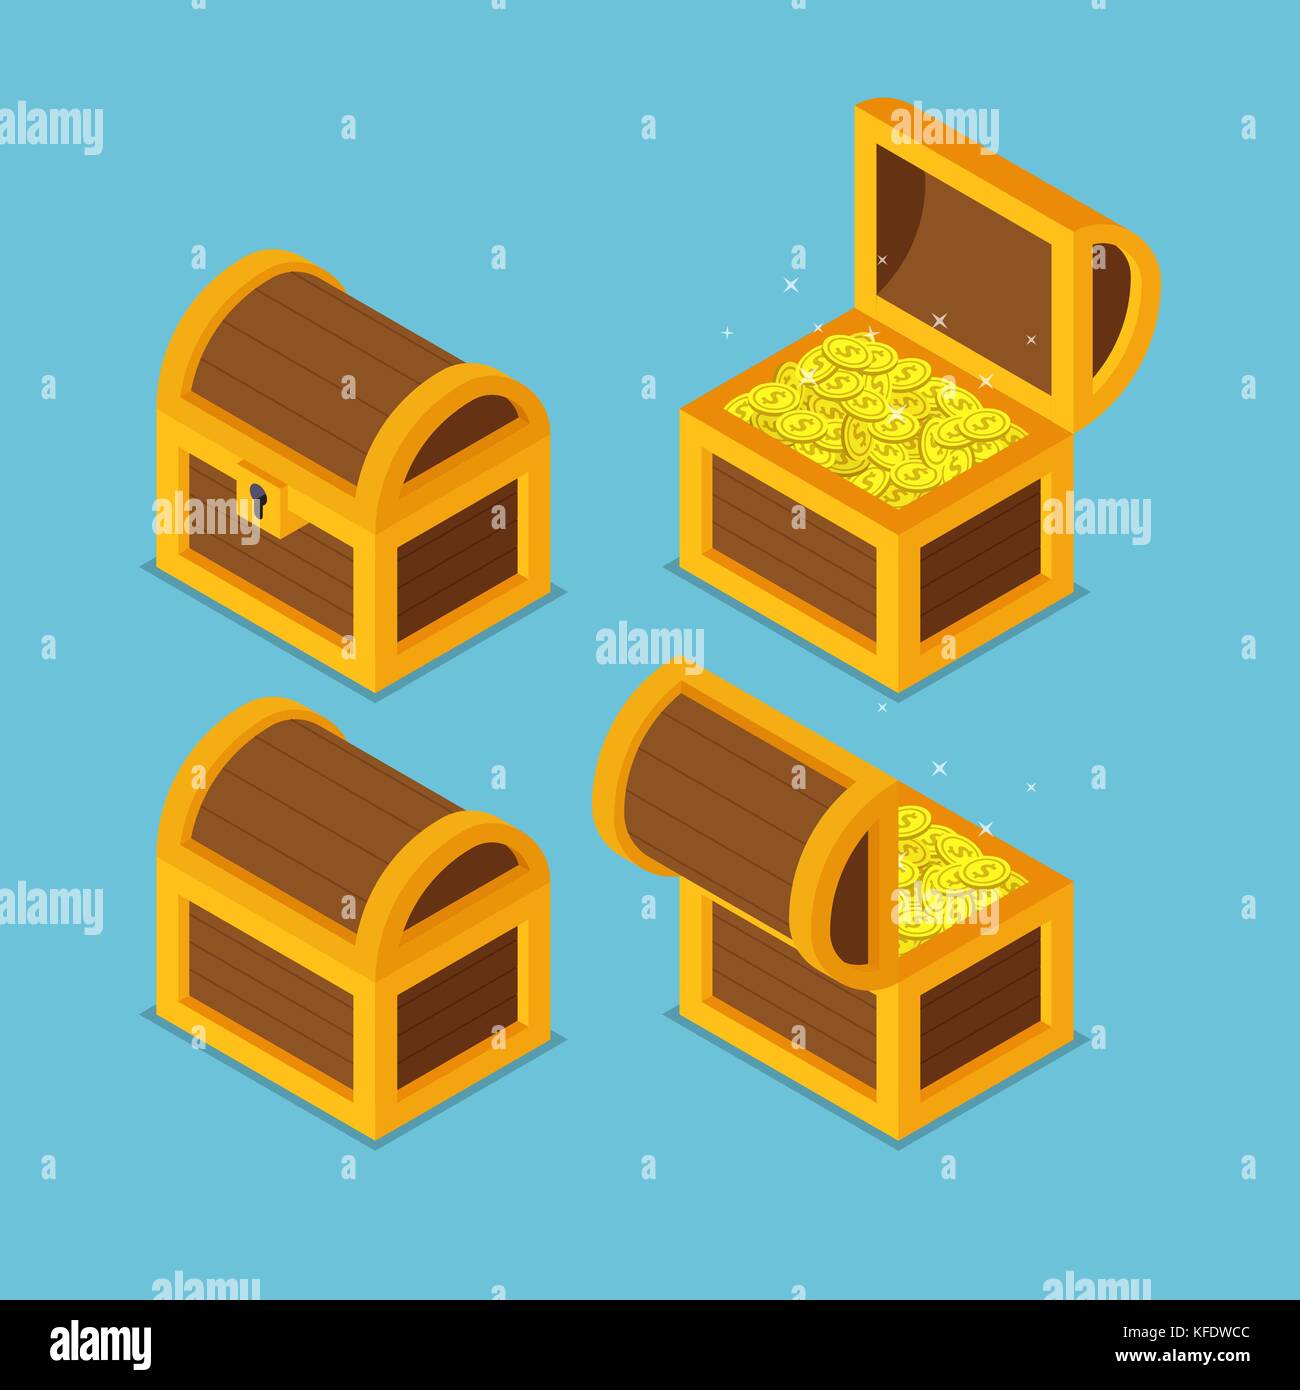 Flat 3d isometric open and closed wooden treasure chests. Stock Vector